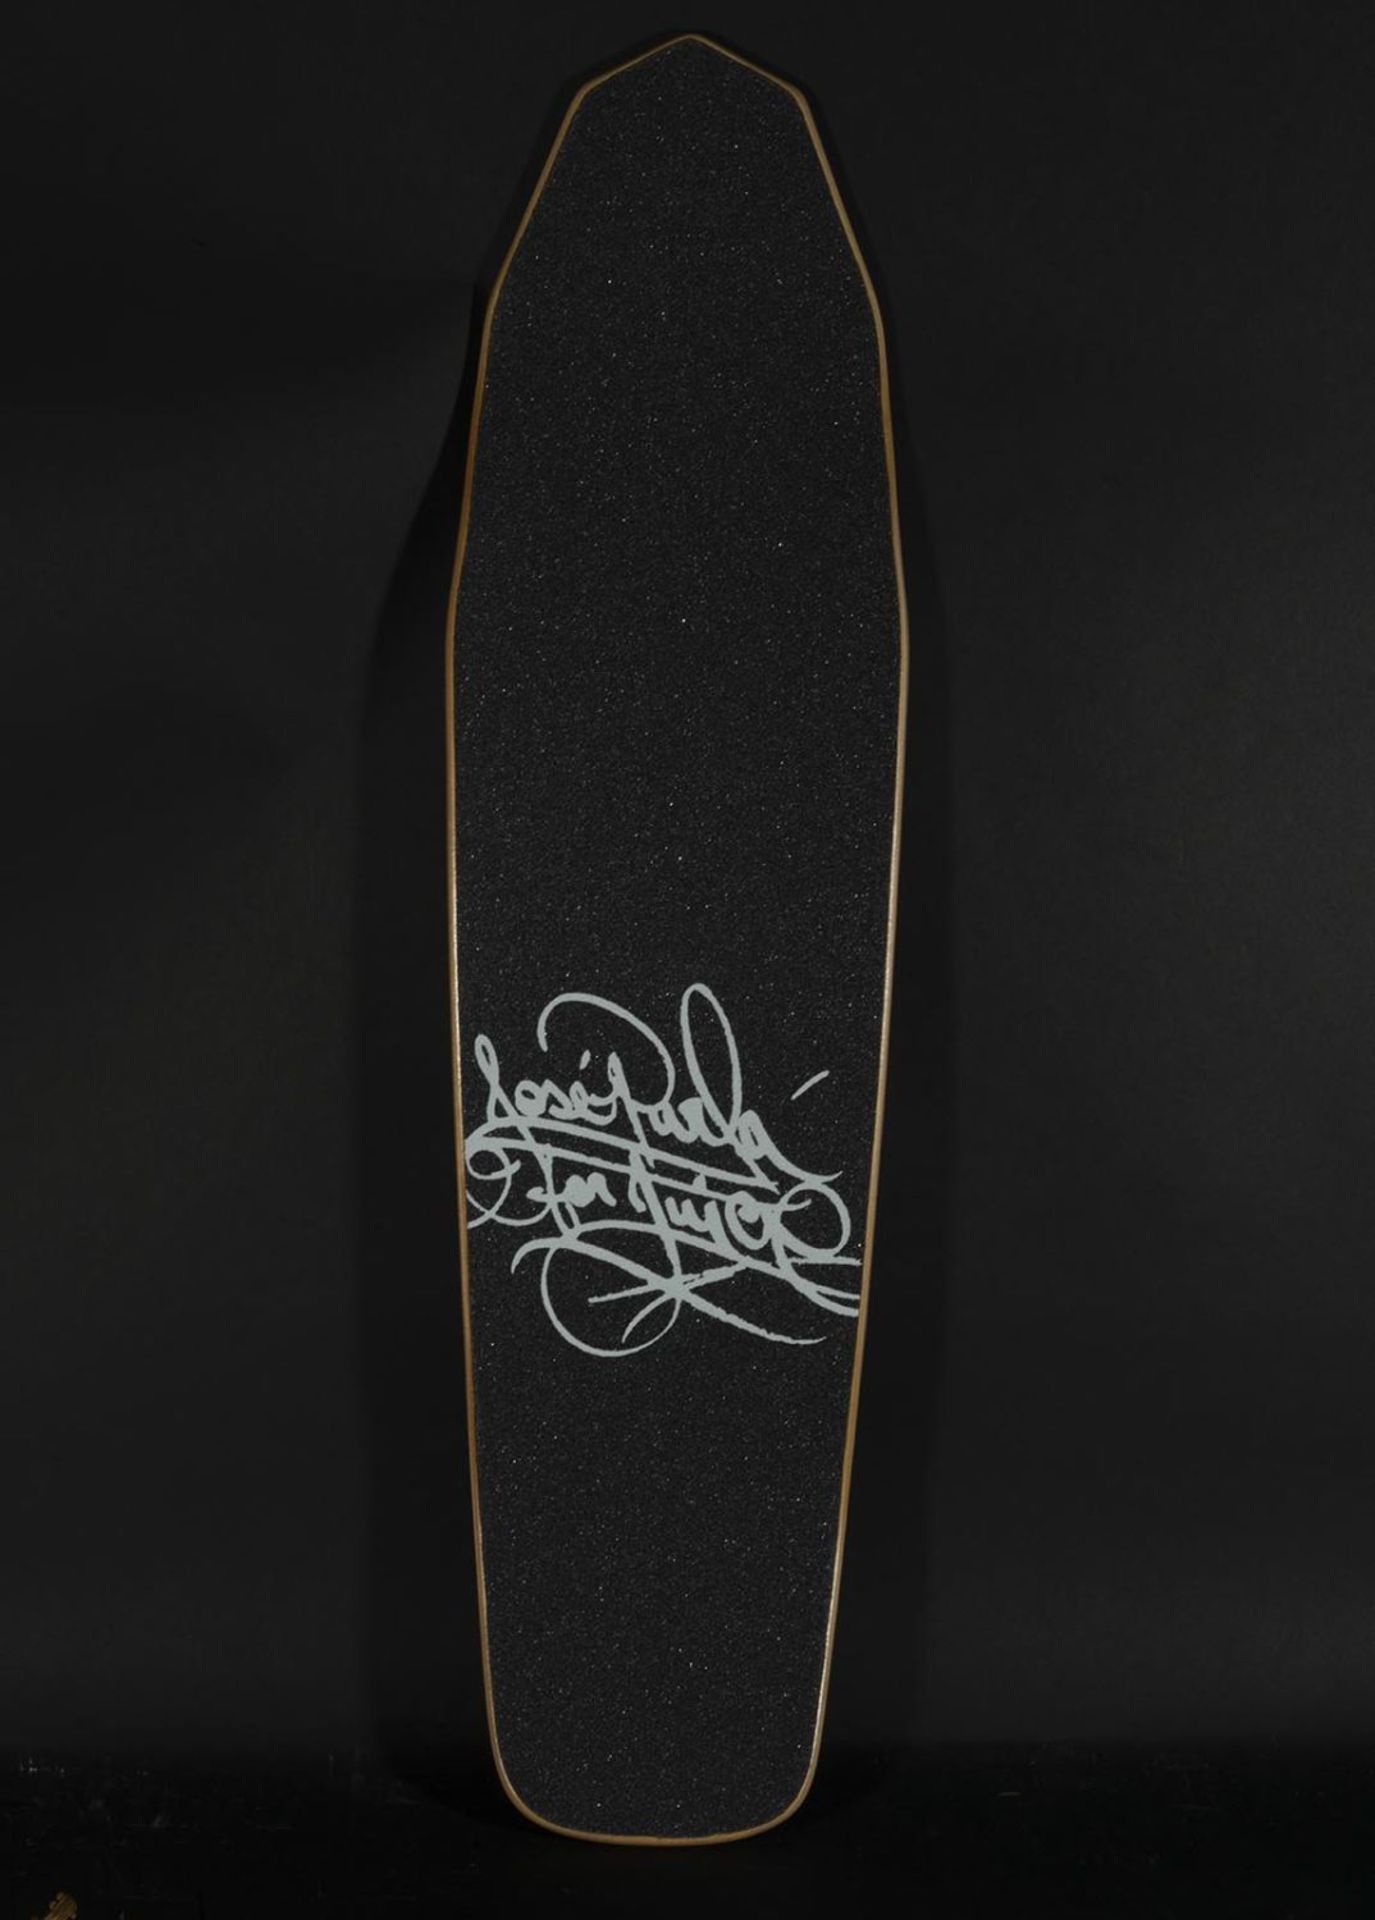 Skate, José Parla (born in Miami, Florida, 1973), limited edition of 200 units - Image 5 of 9